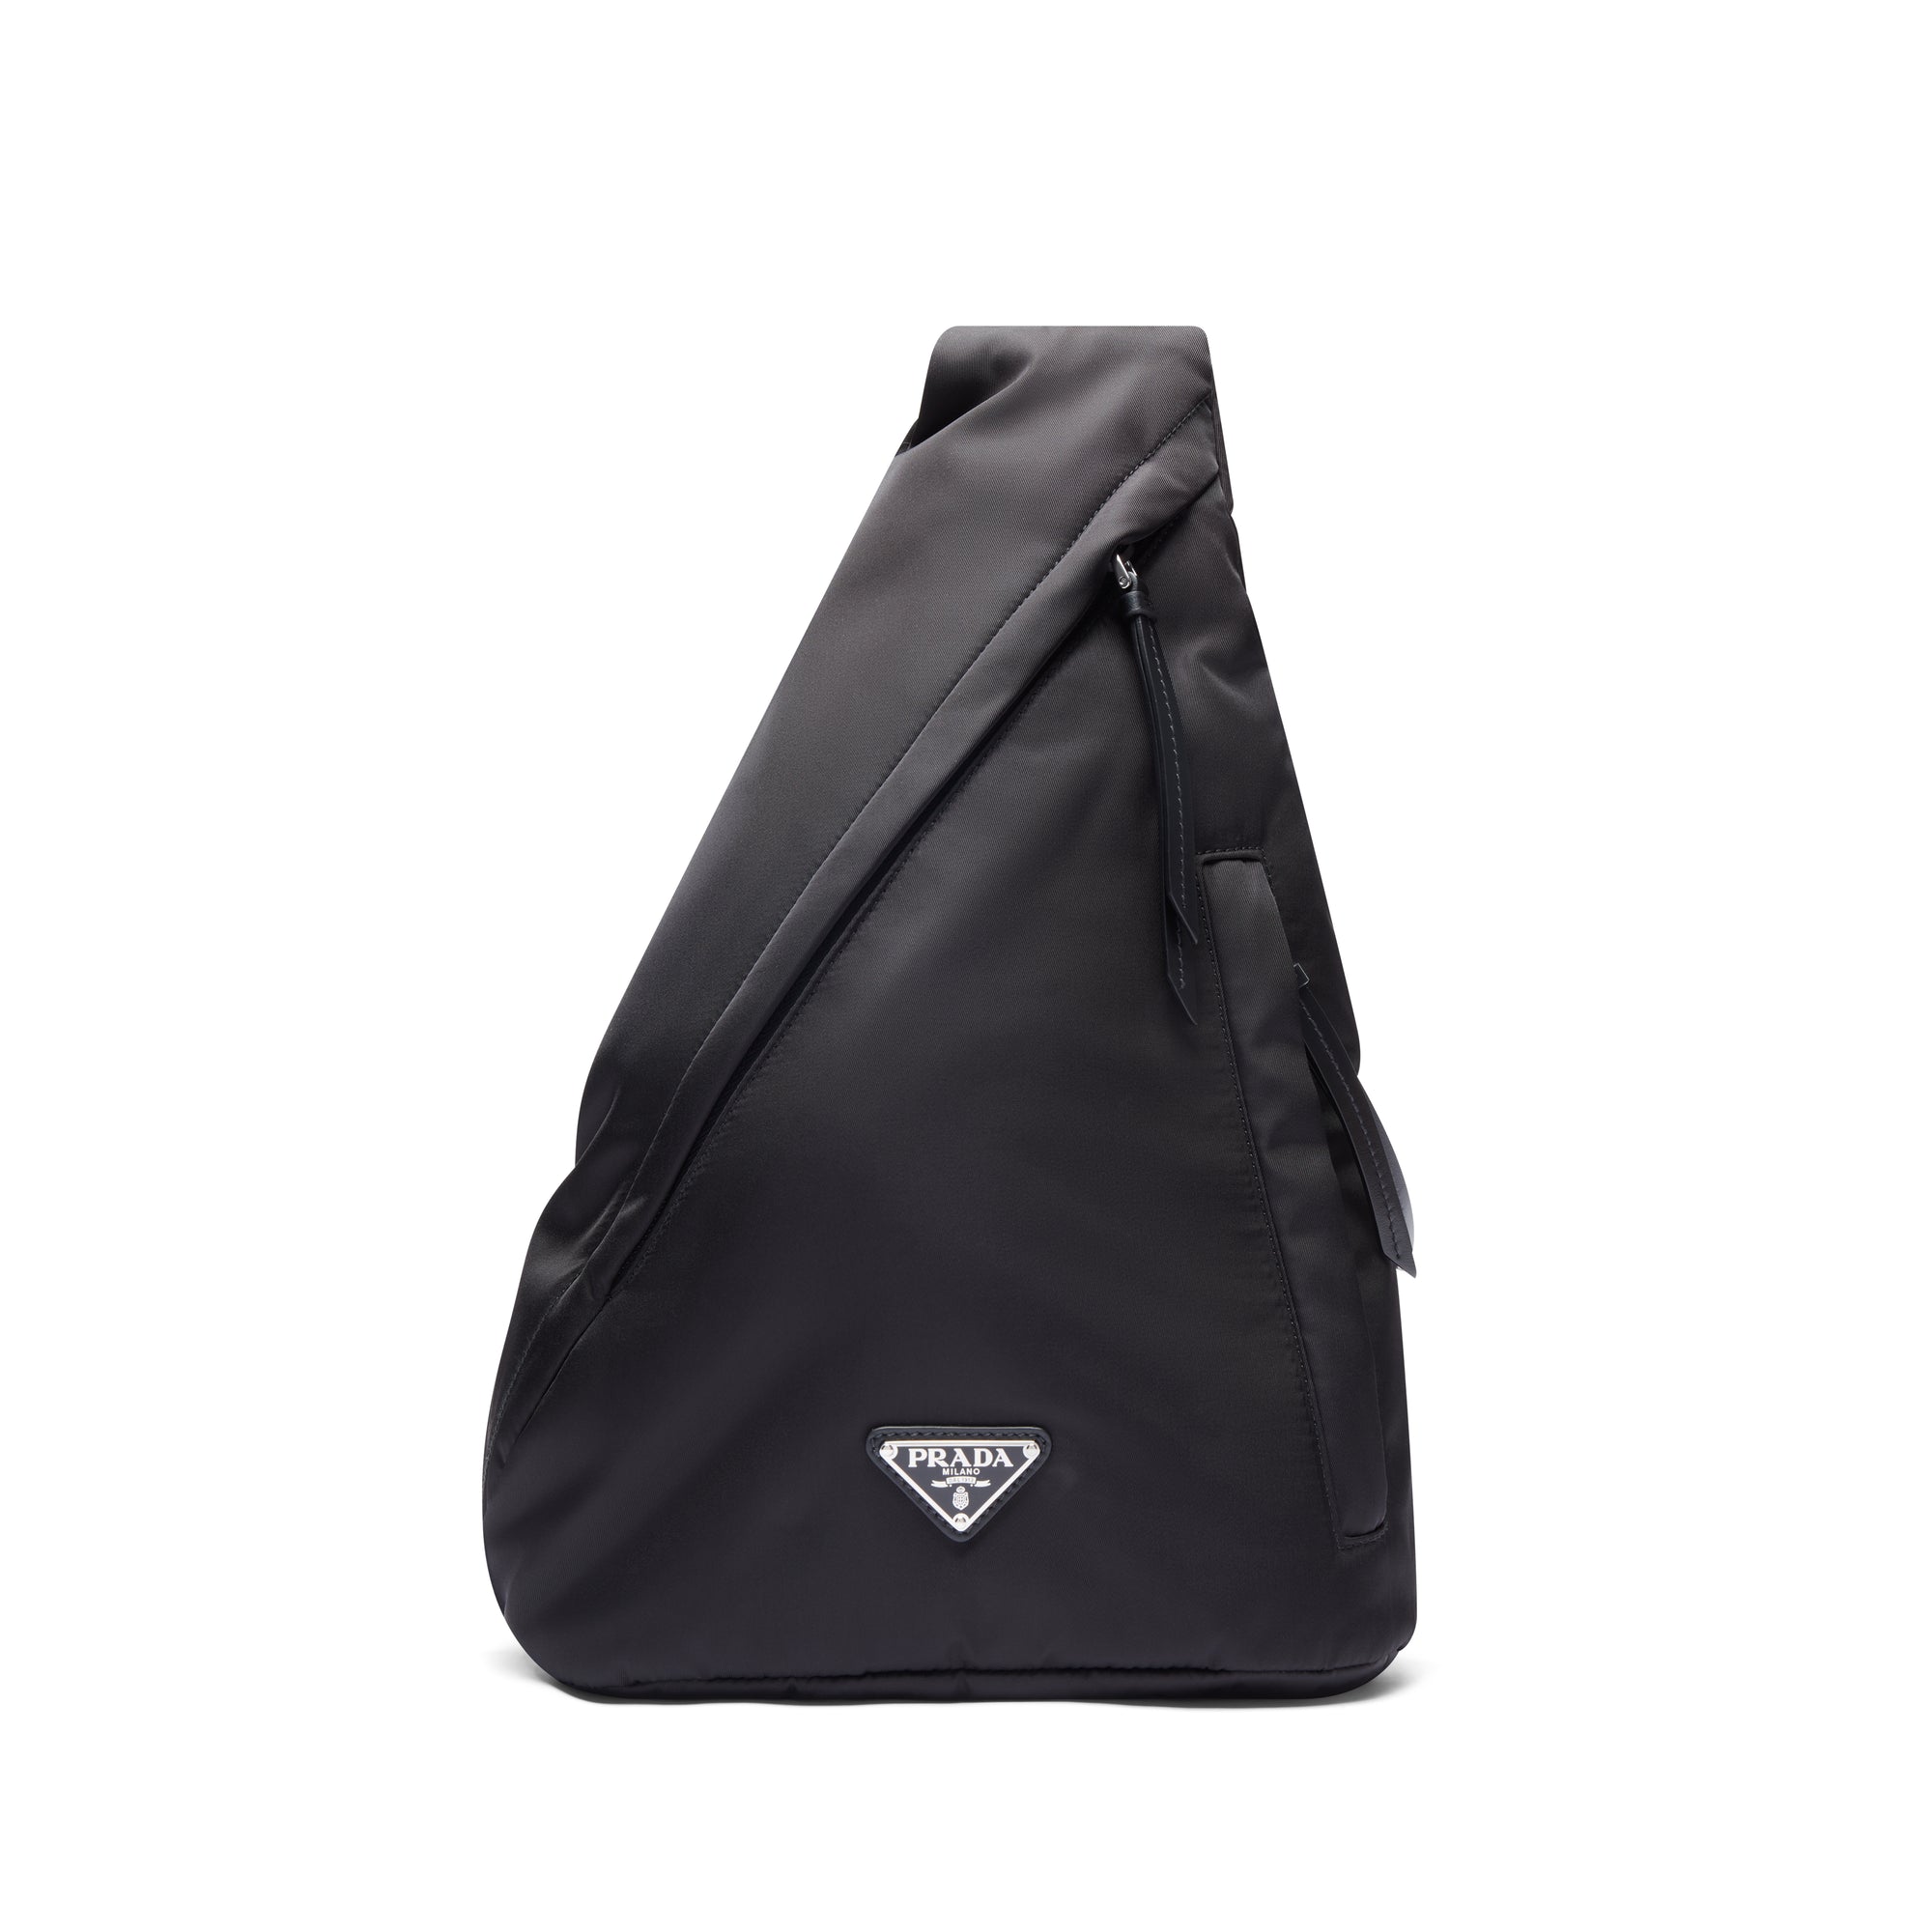 Prada - Men’s Re-Nylon and Leather Backpack - (Black) view 1